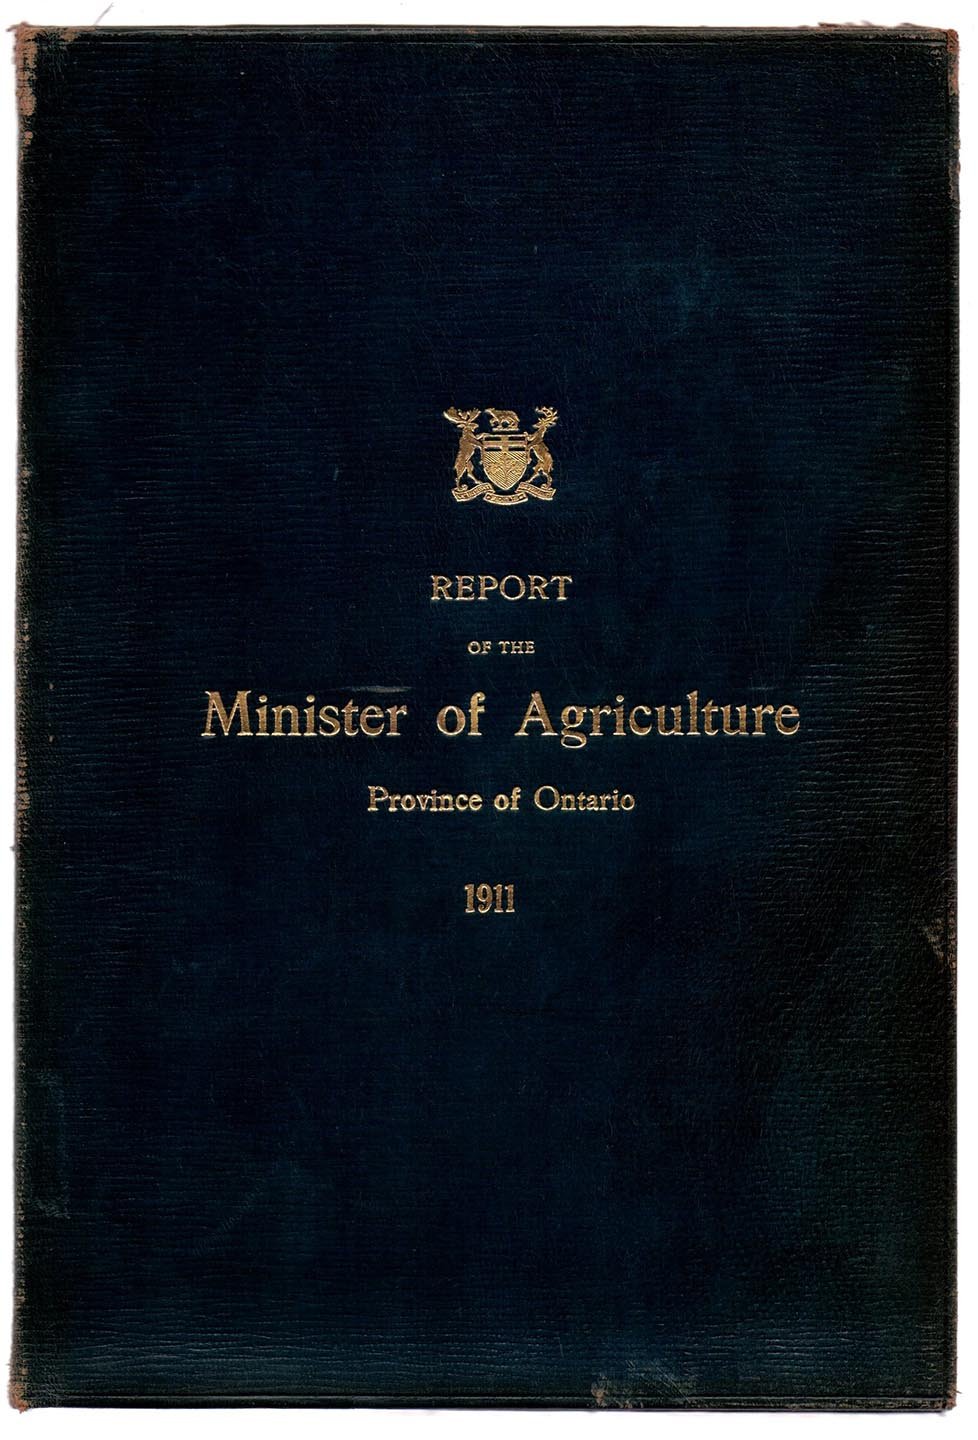 Report of the Minister of Agriculture, Province of Ontario, For the Year Ending October 31, 1911